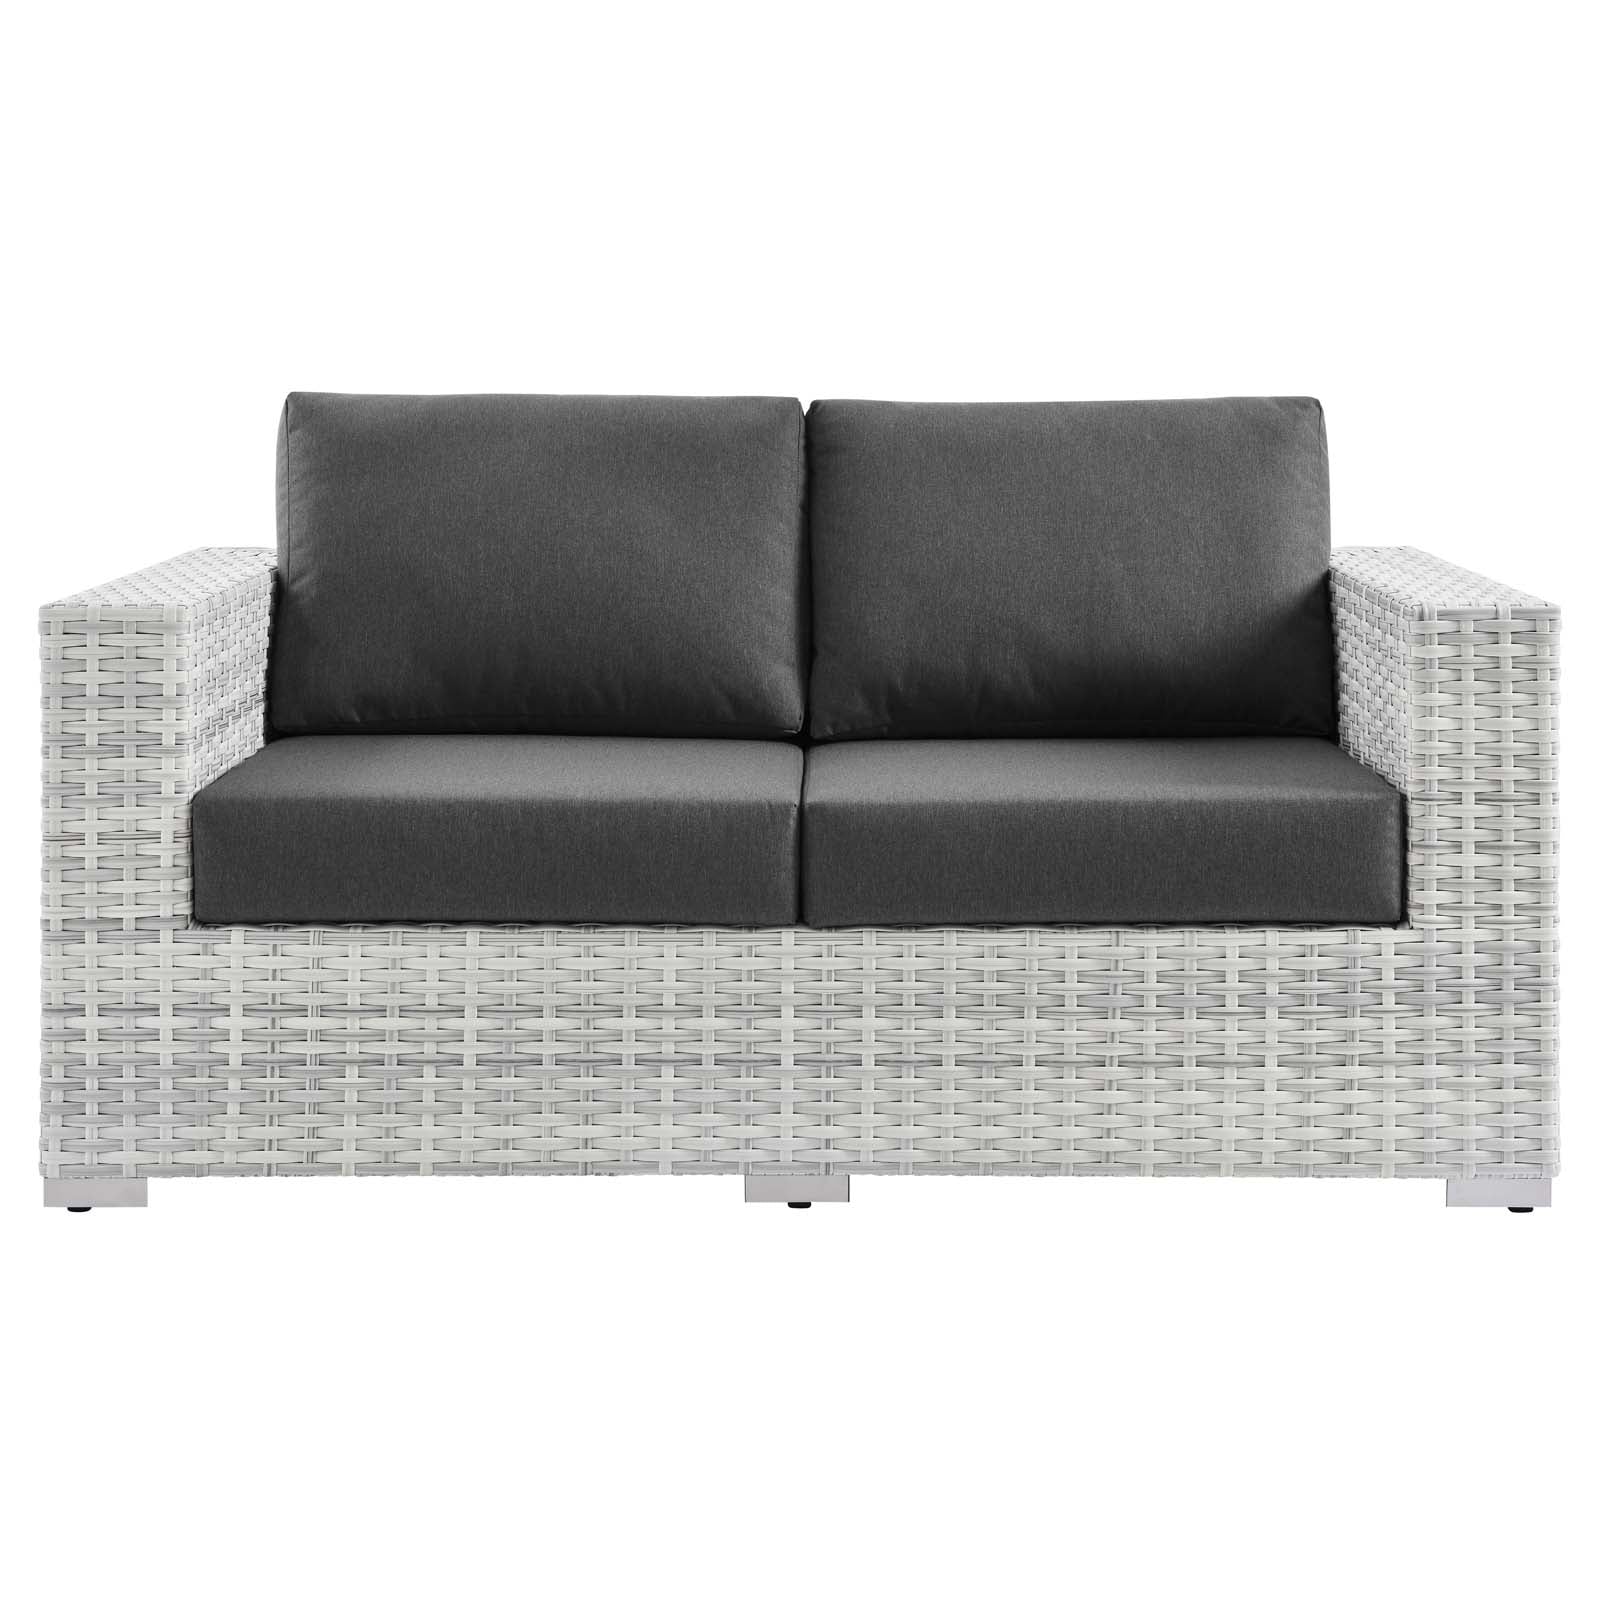 Modway Outdoor Sofas - Convene Outdoor Patio Loveseat Light Gray Charcoal